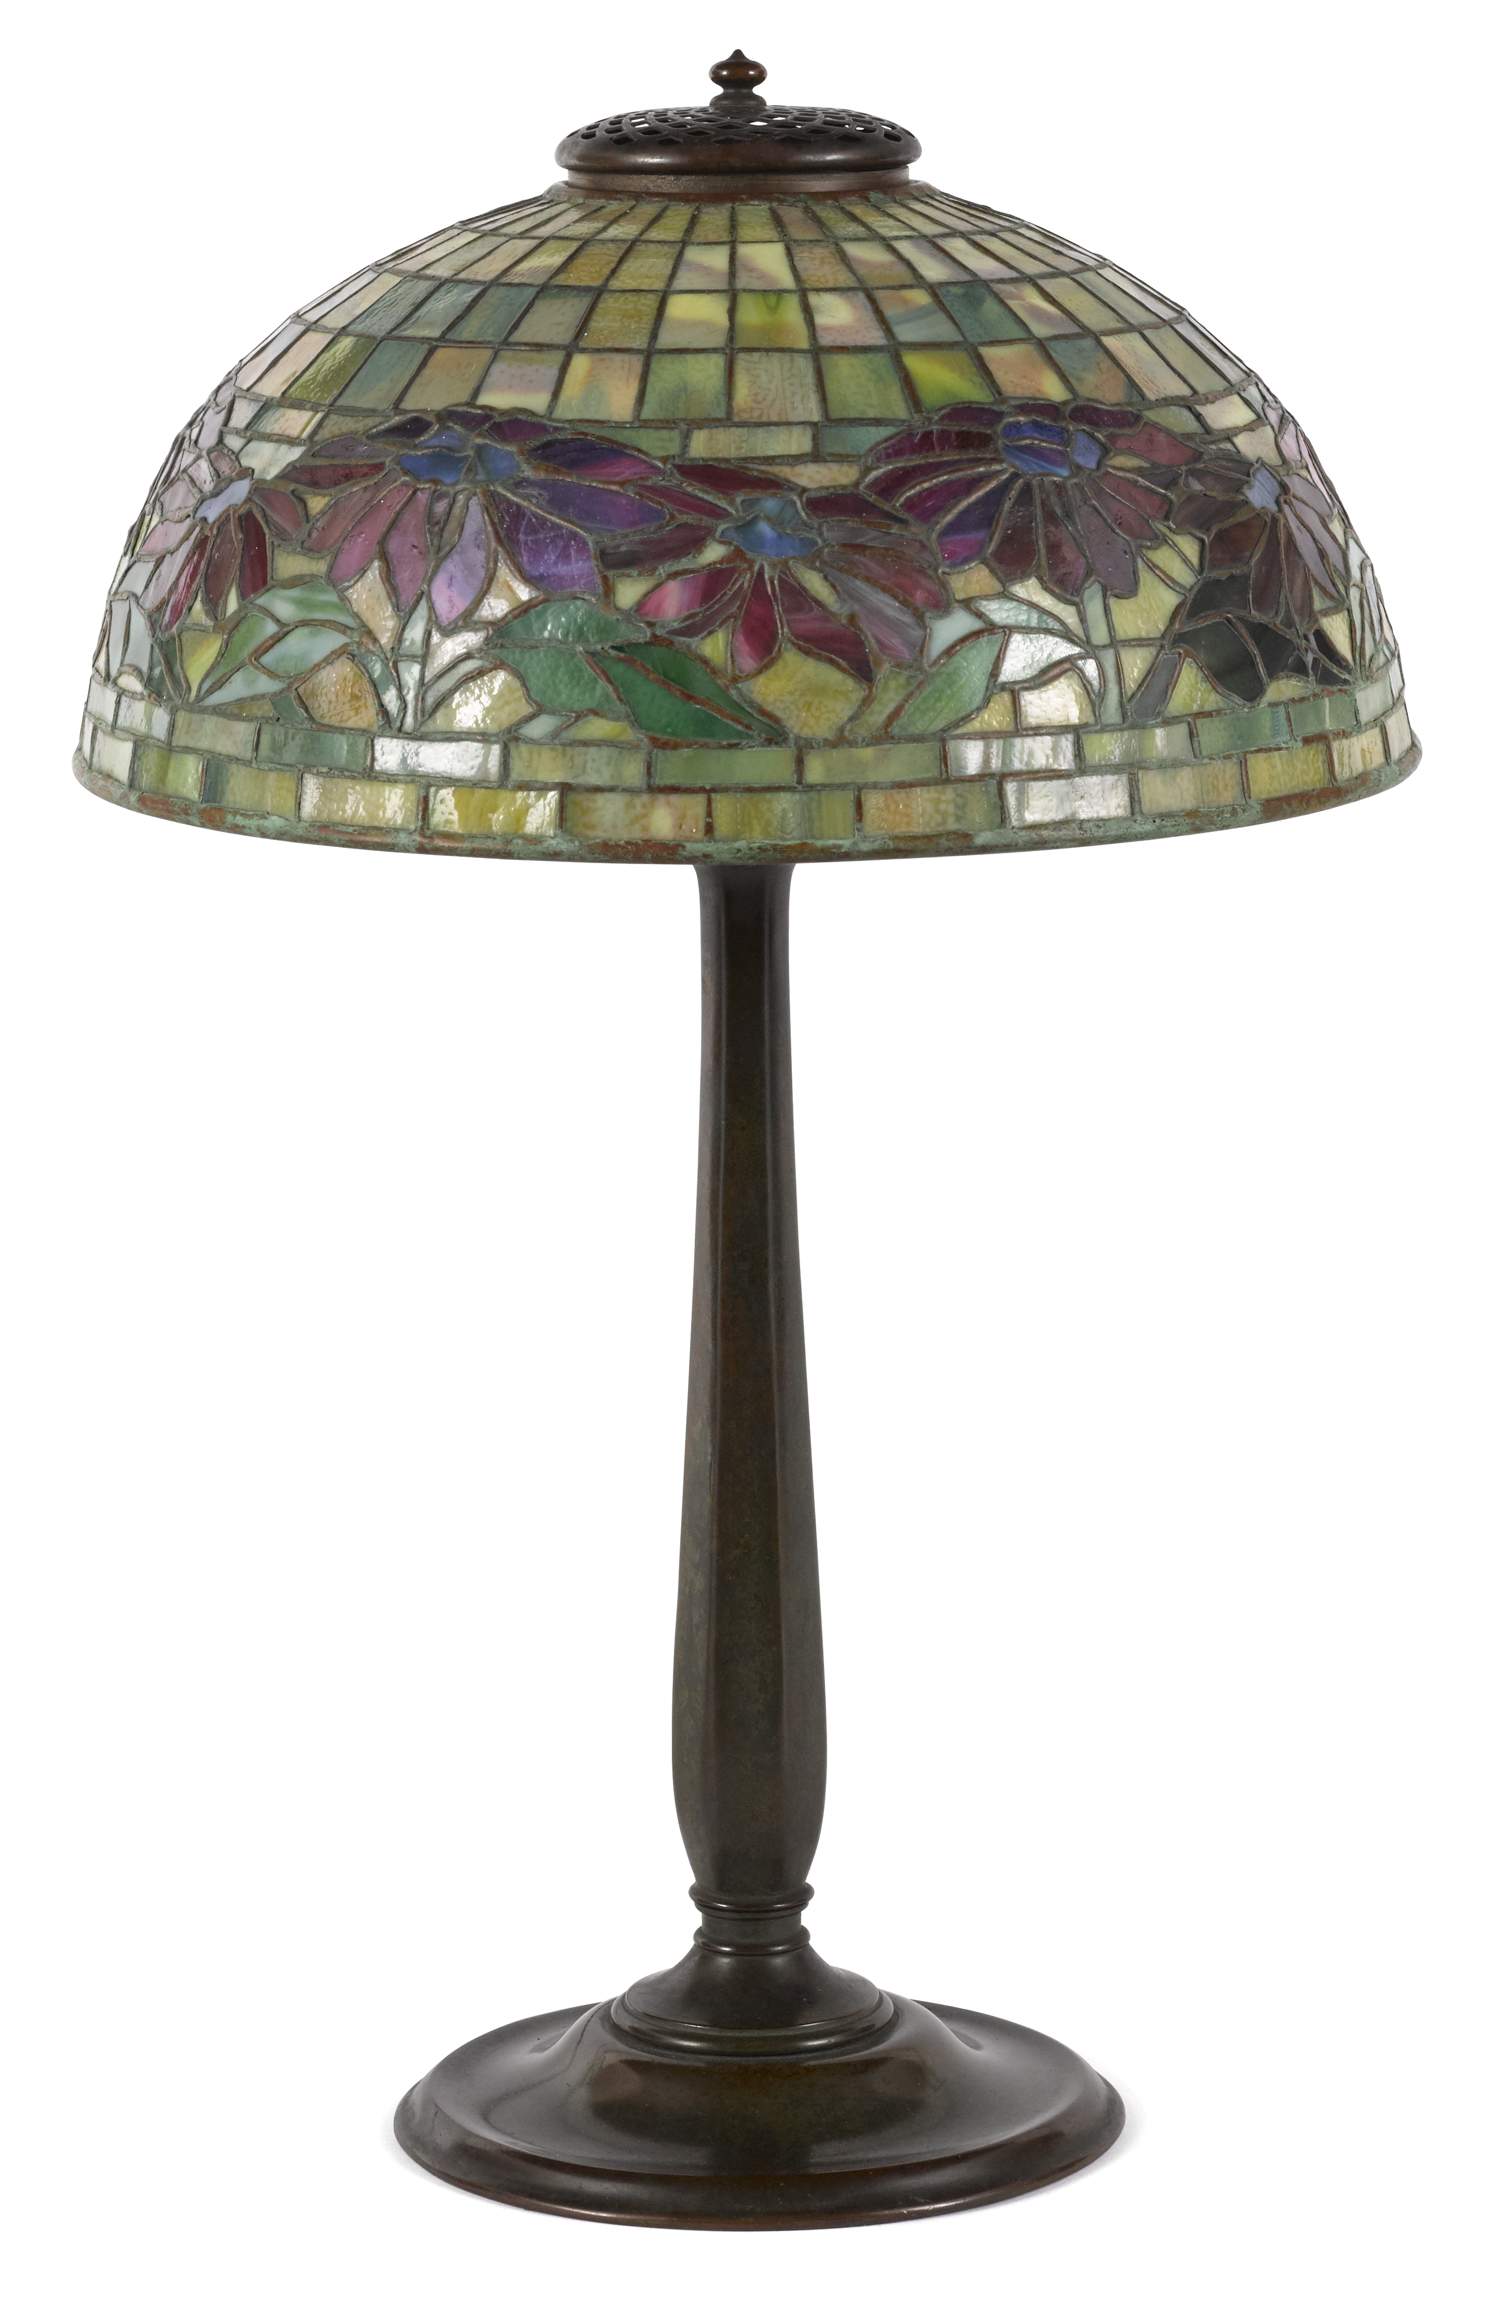 Among highly contested lots busying the firm’s phone banks was this Tiffany Studios patinated bronze table lamp with a leaded glass poinsettia shade, which earned $ 26,400.